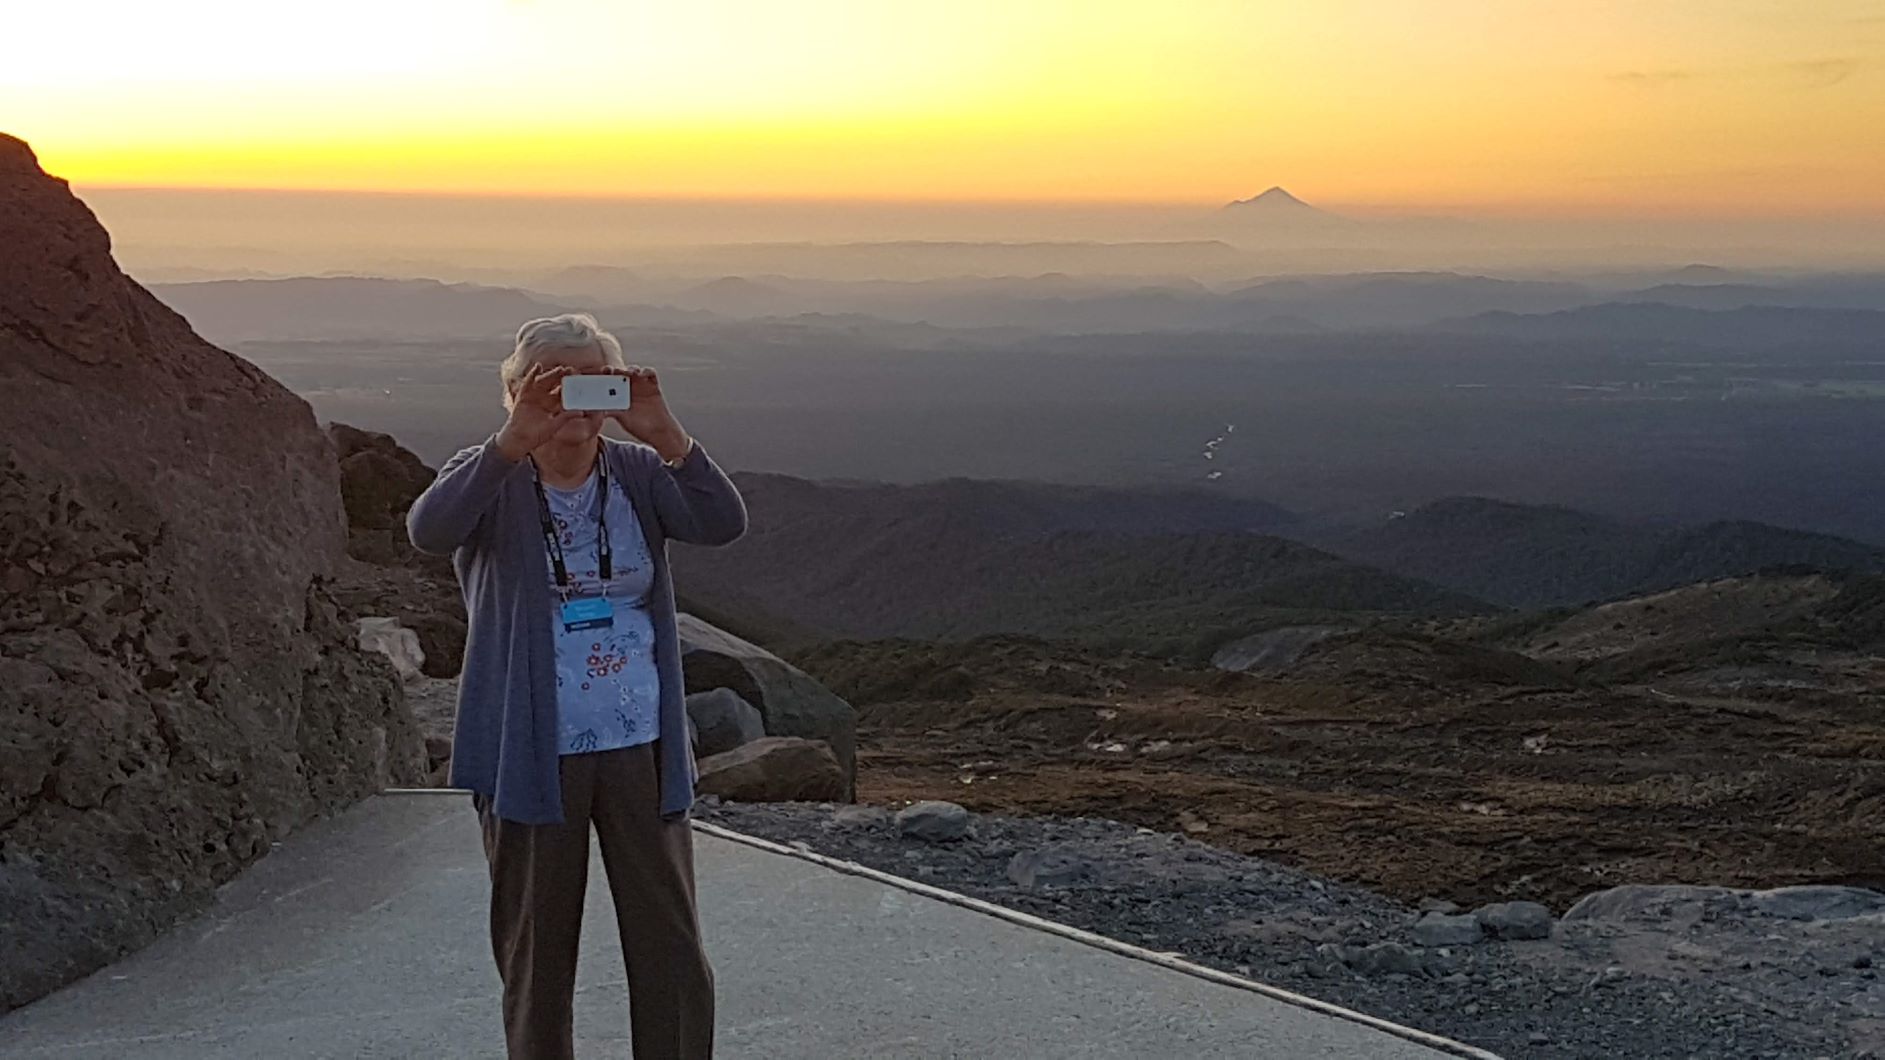 Margaret getting to grips with a selfie and impressive smokey sunset via Australia, Mount Taranaki in the background